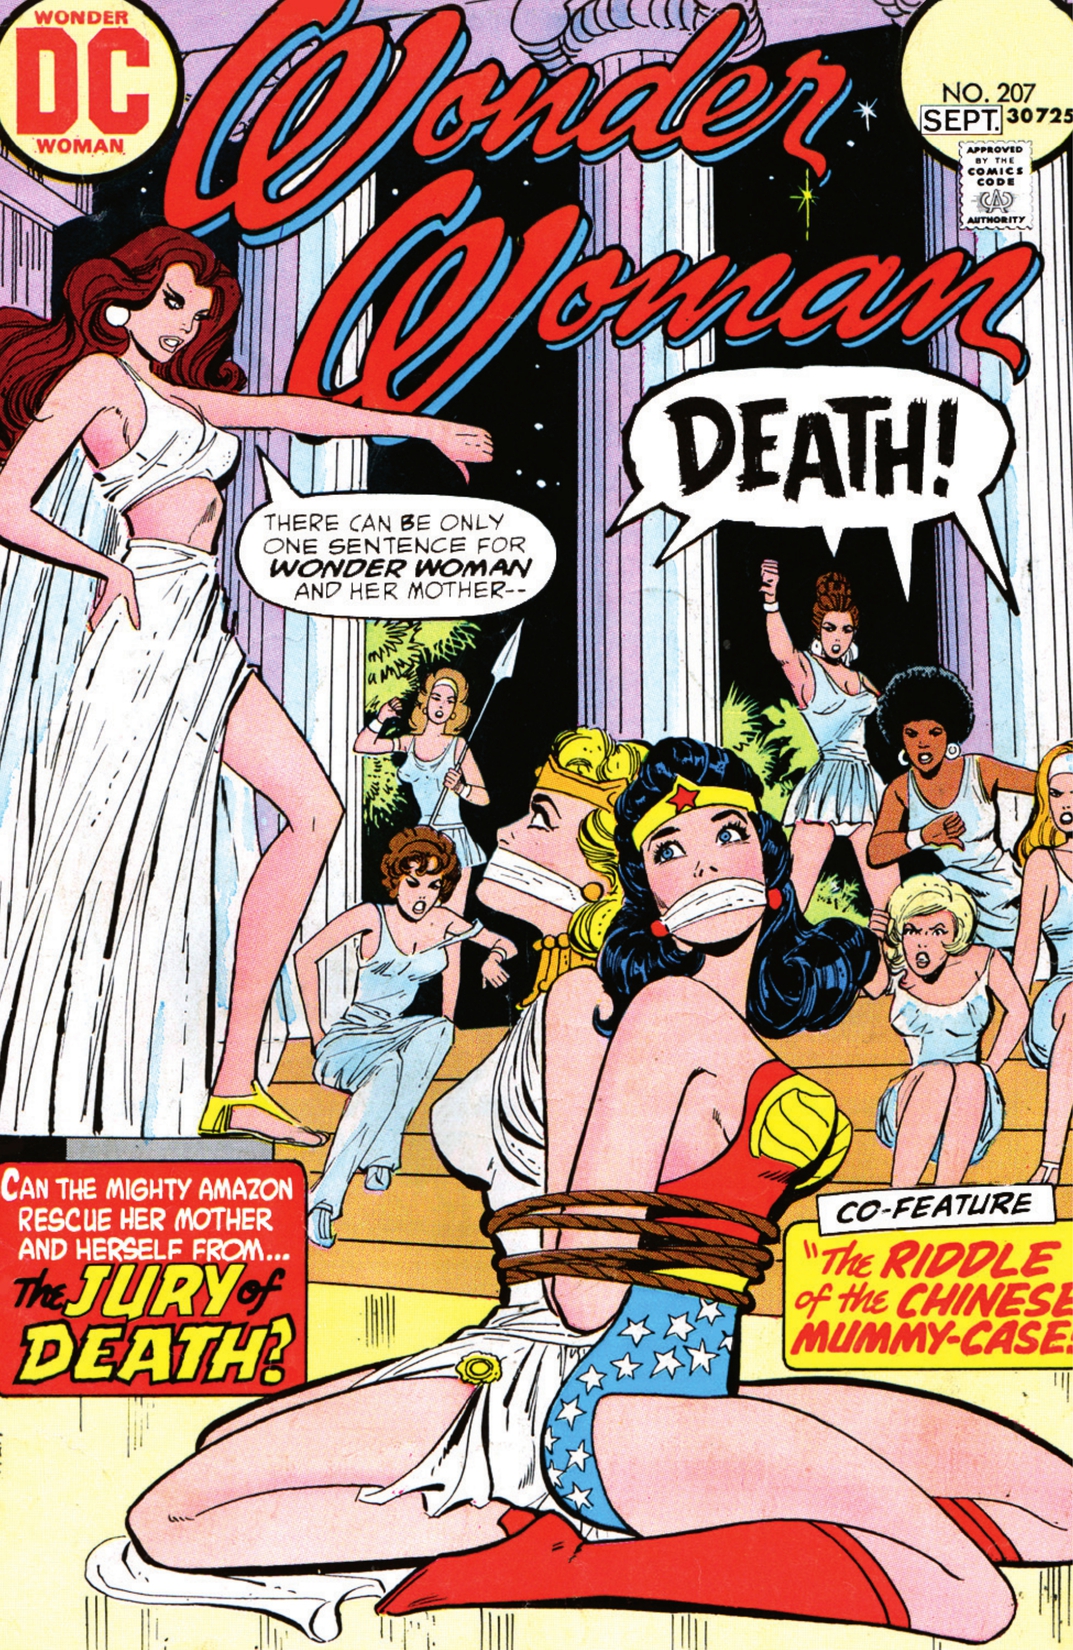 Wonder Woman (1942-1986) #207 preview images